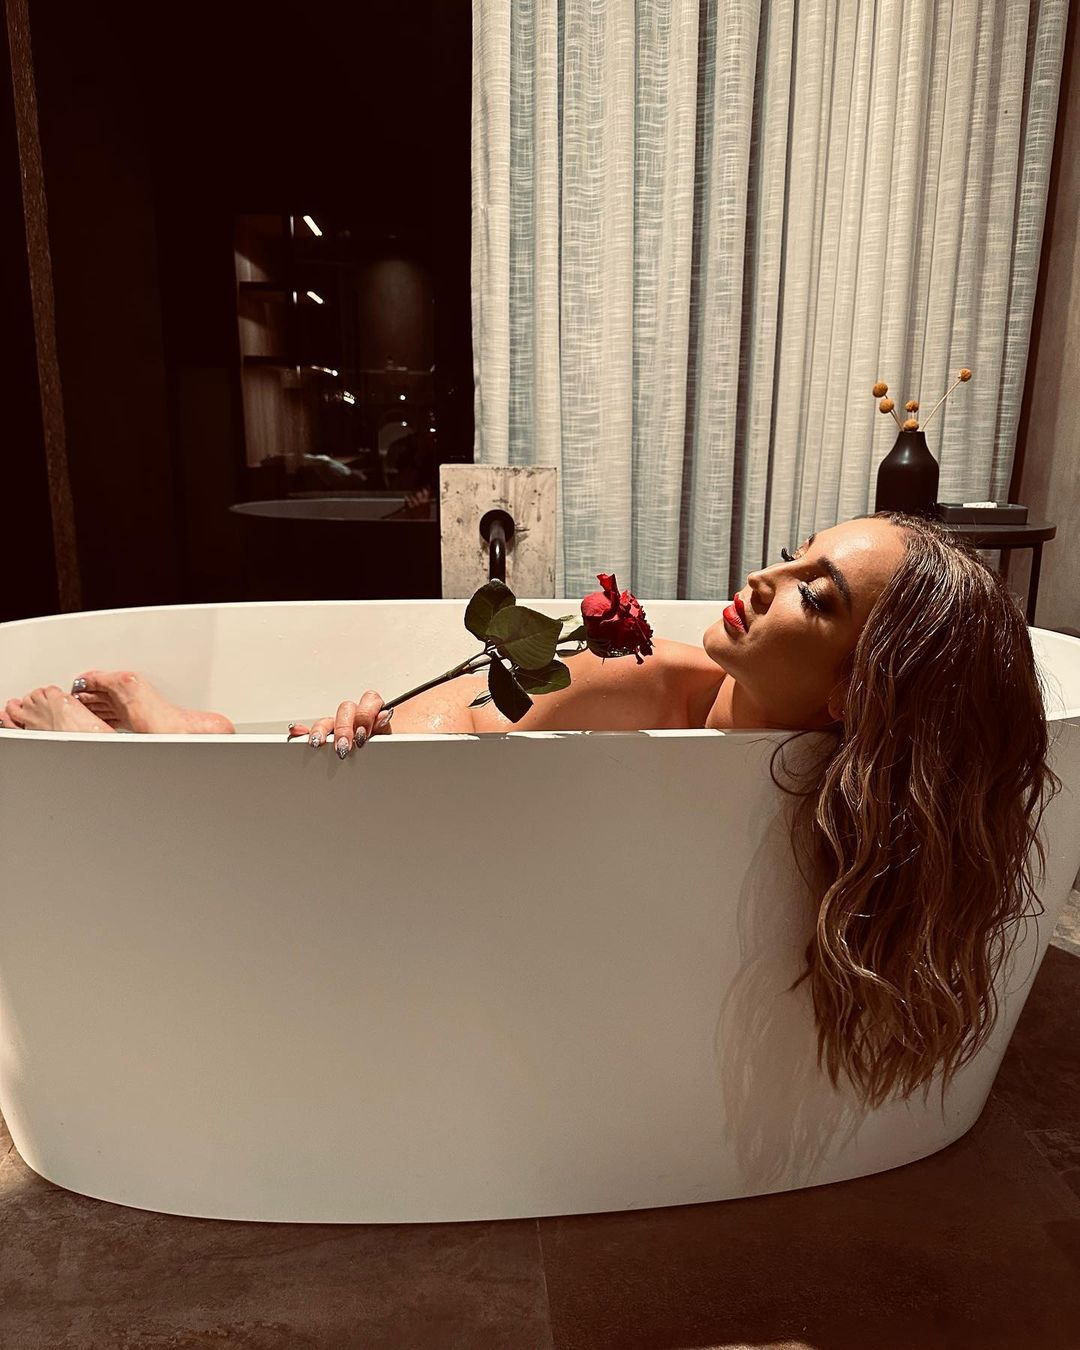 Olga Buzova Poses in Bath Tub with Red Rose during Photoshoot, Feb 2023